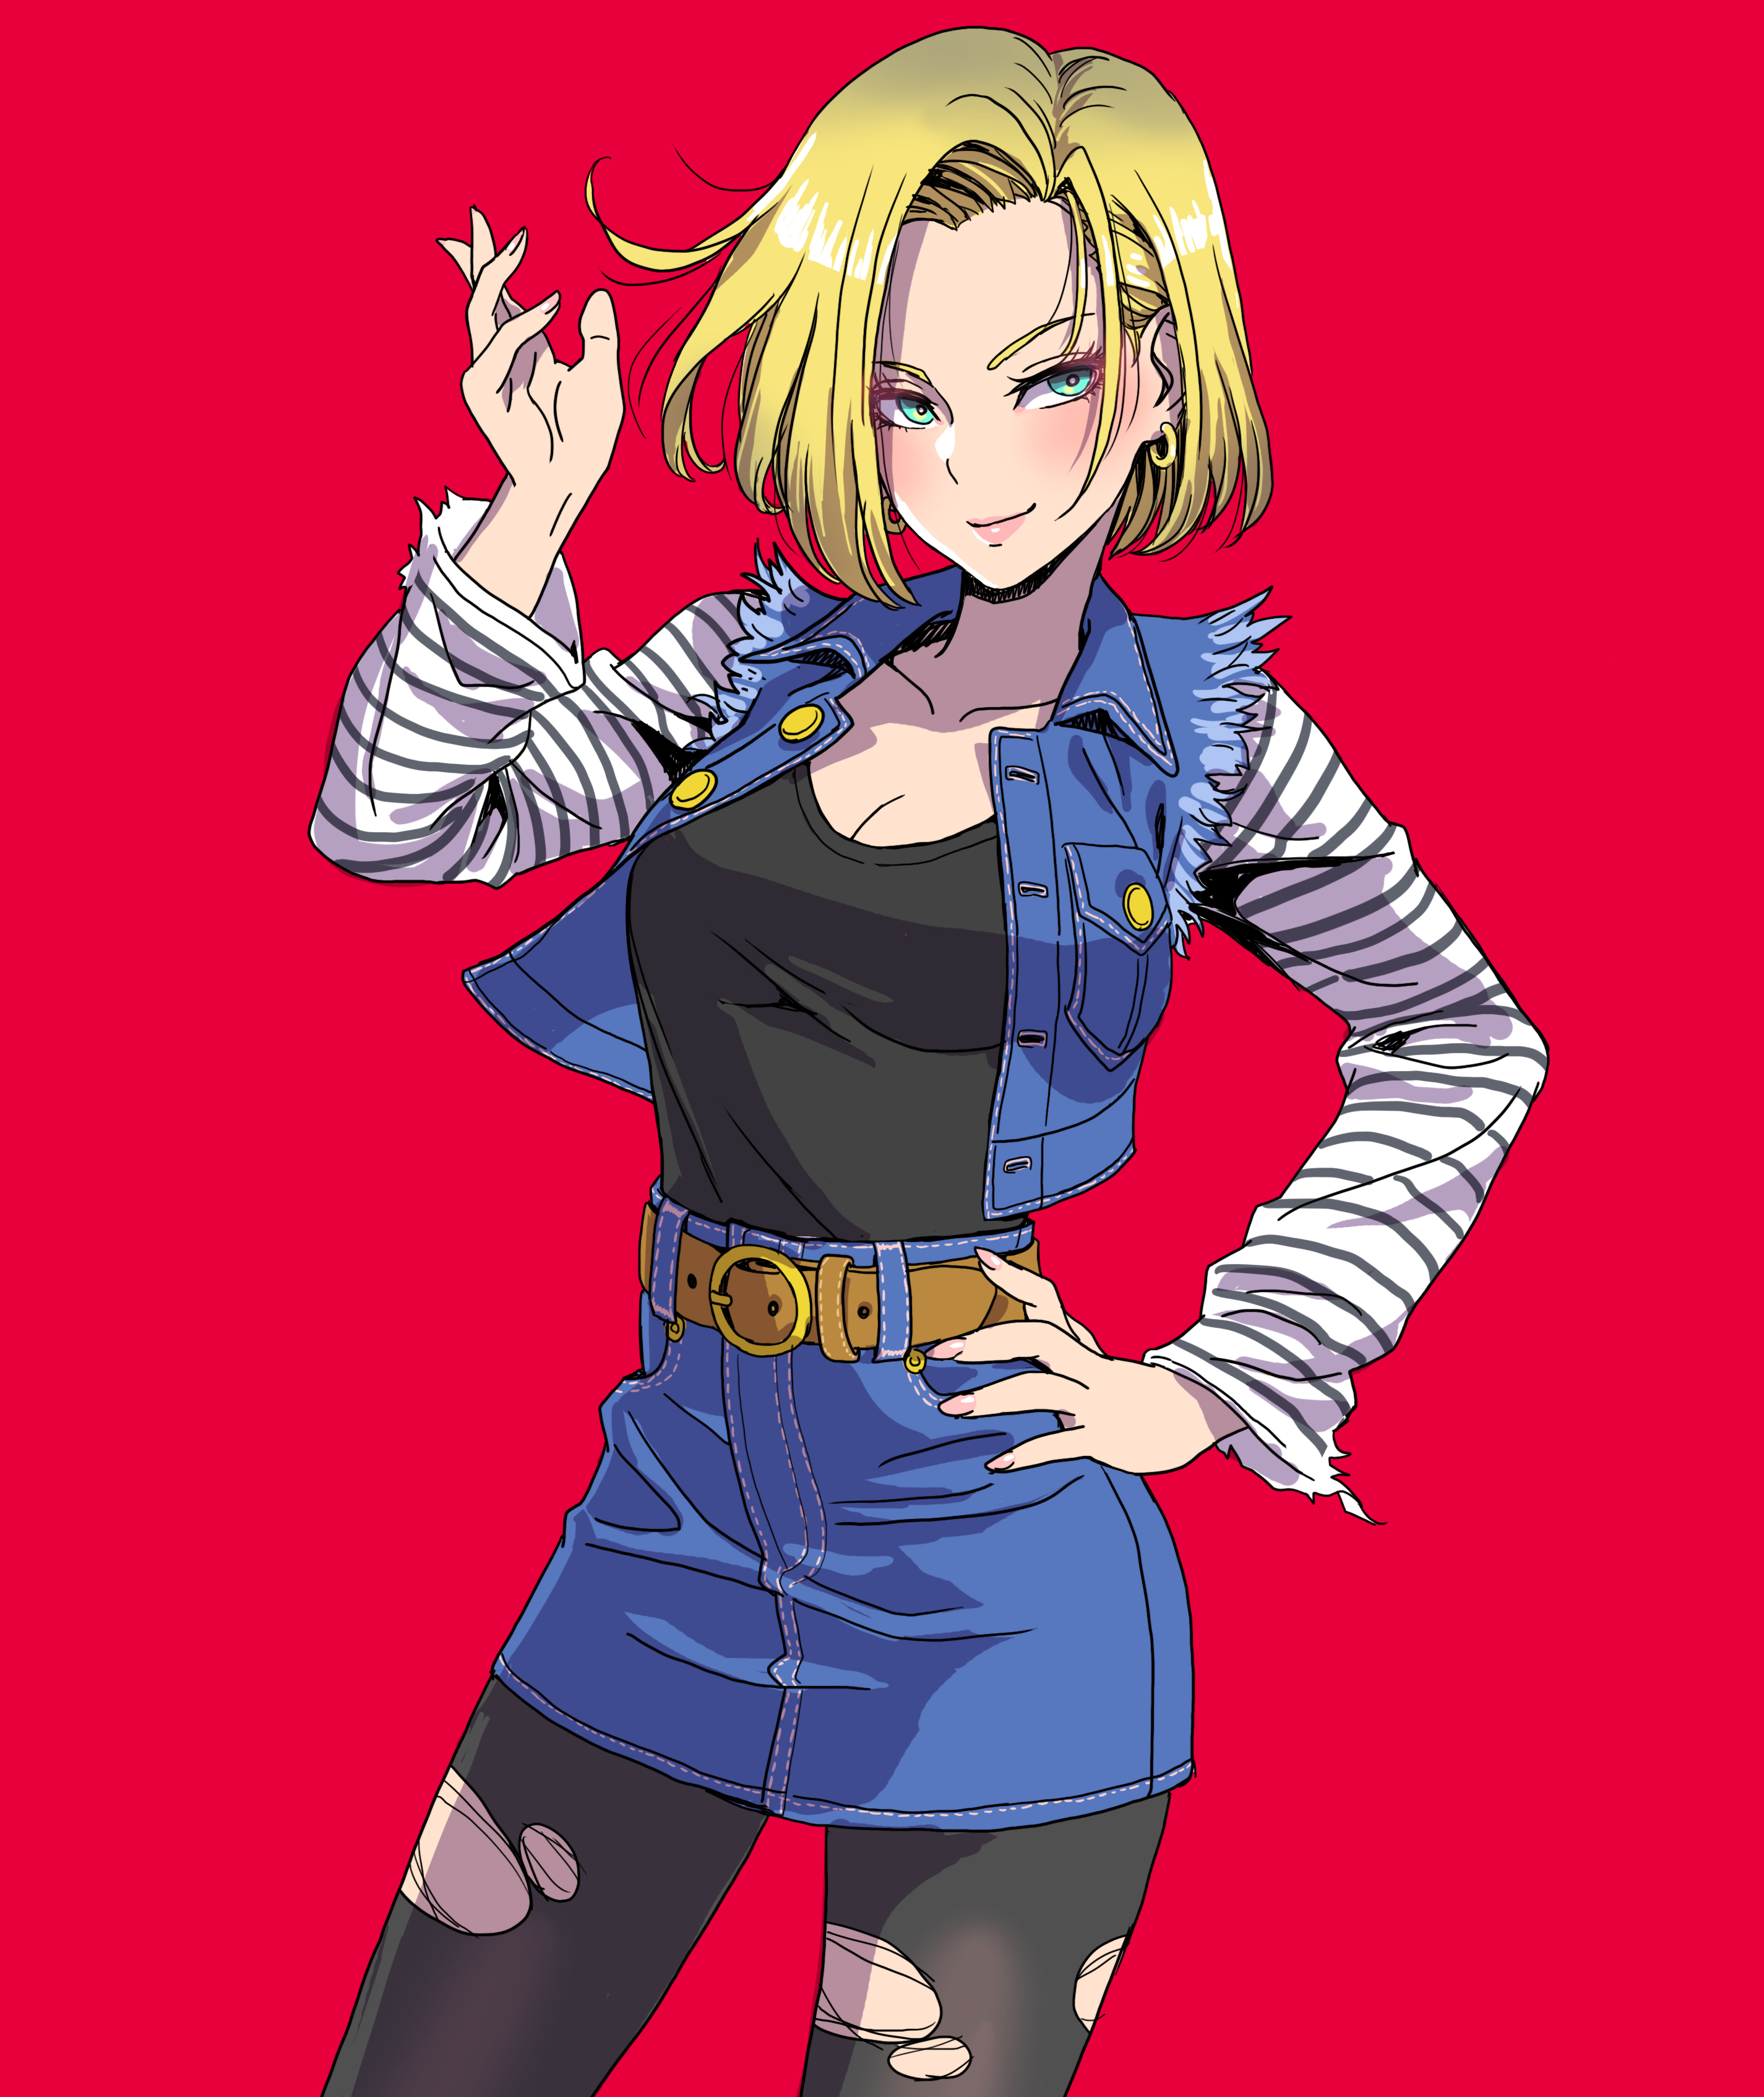 pictures of android 18 from dbz naked